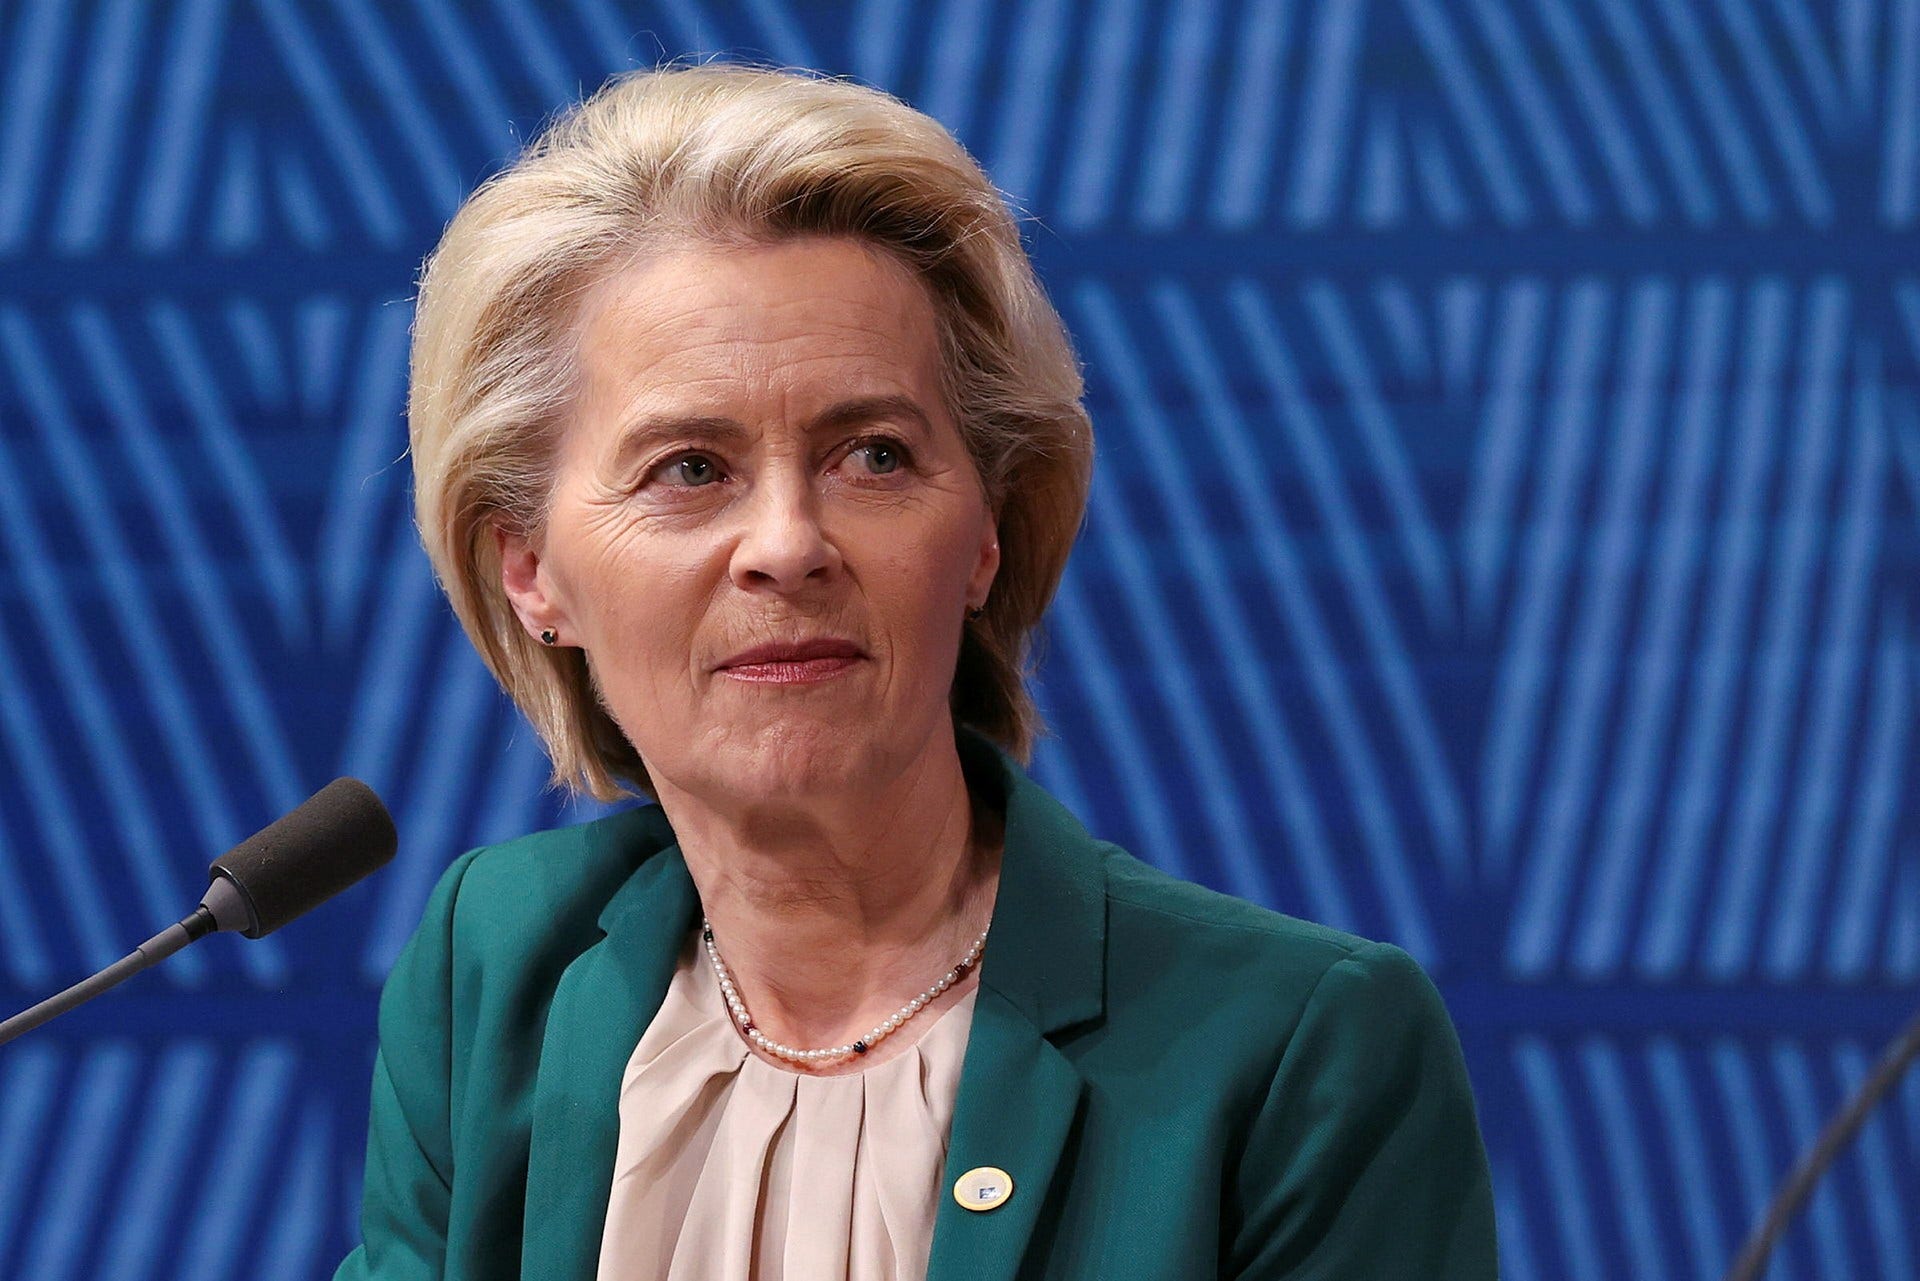 Green light for EU's next trilateral leadership